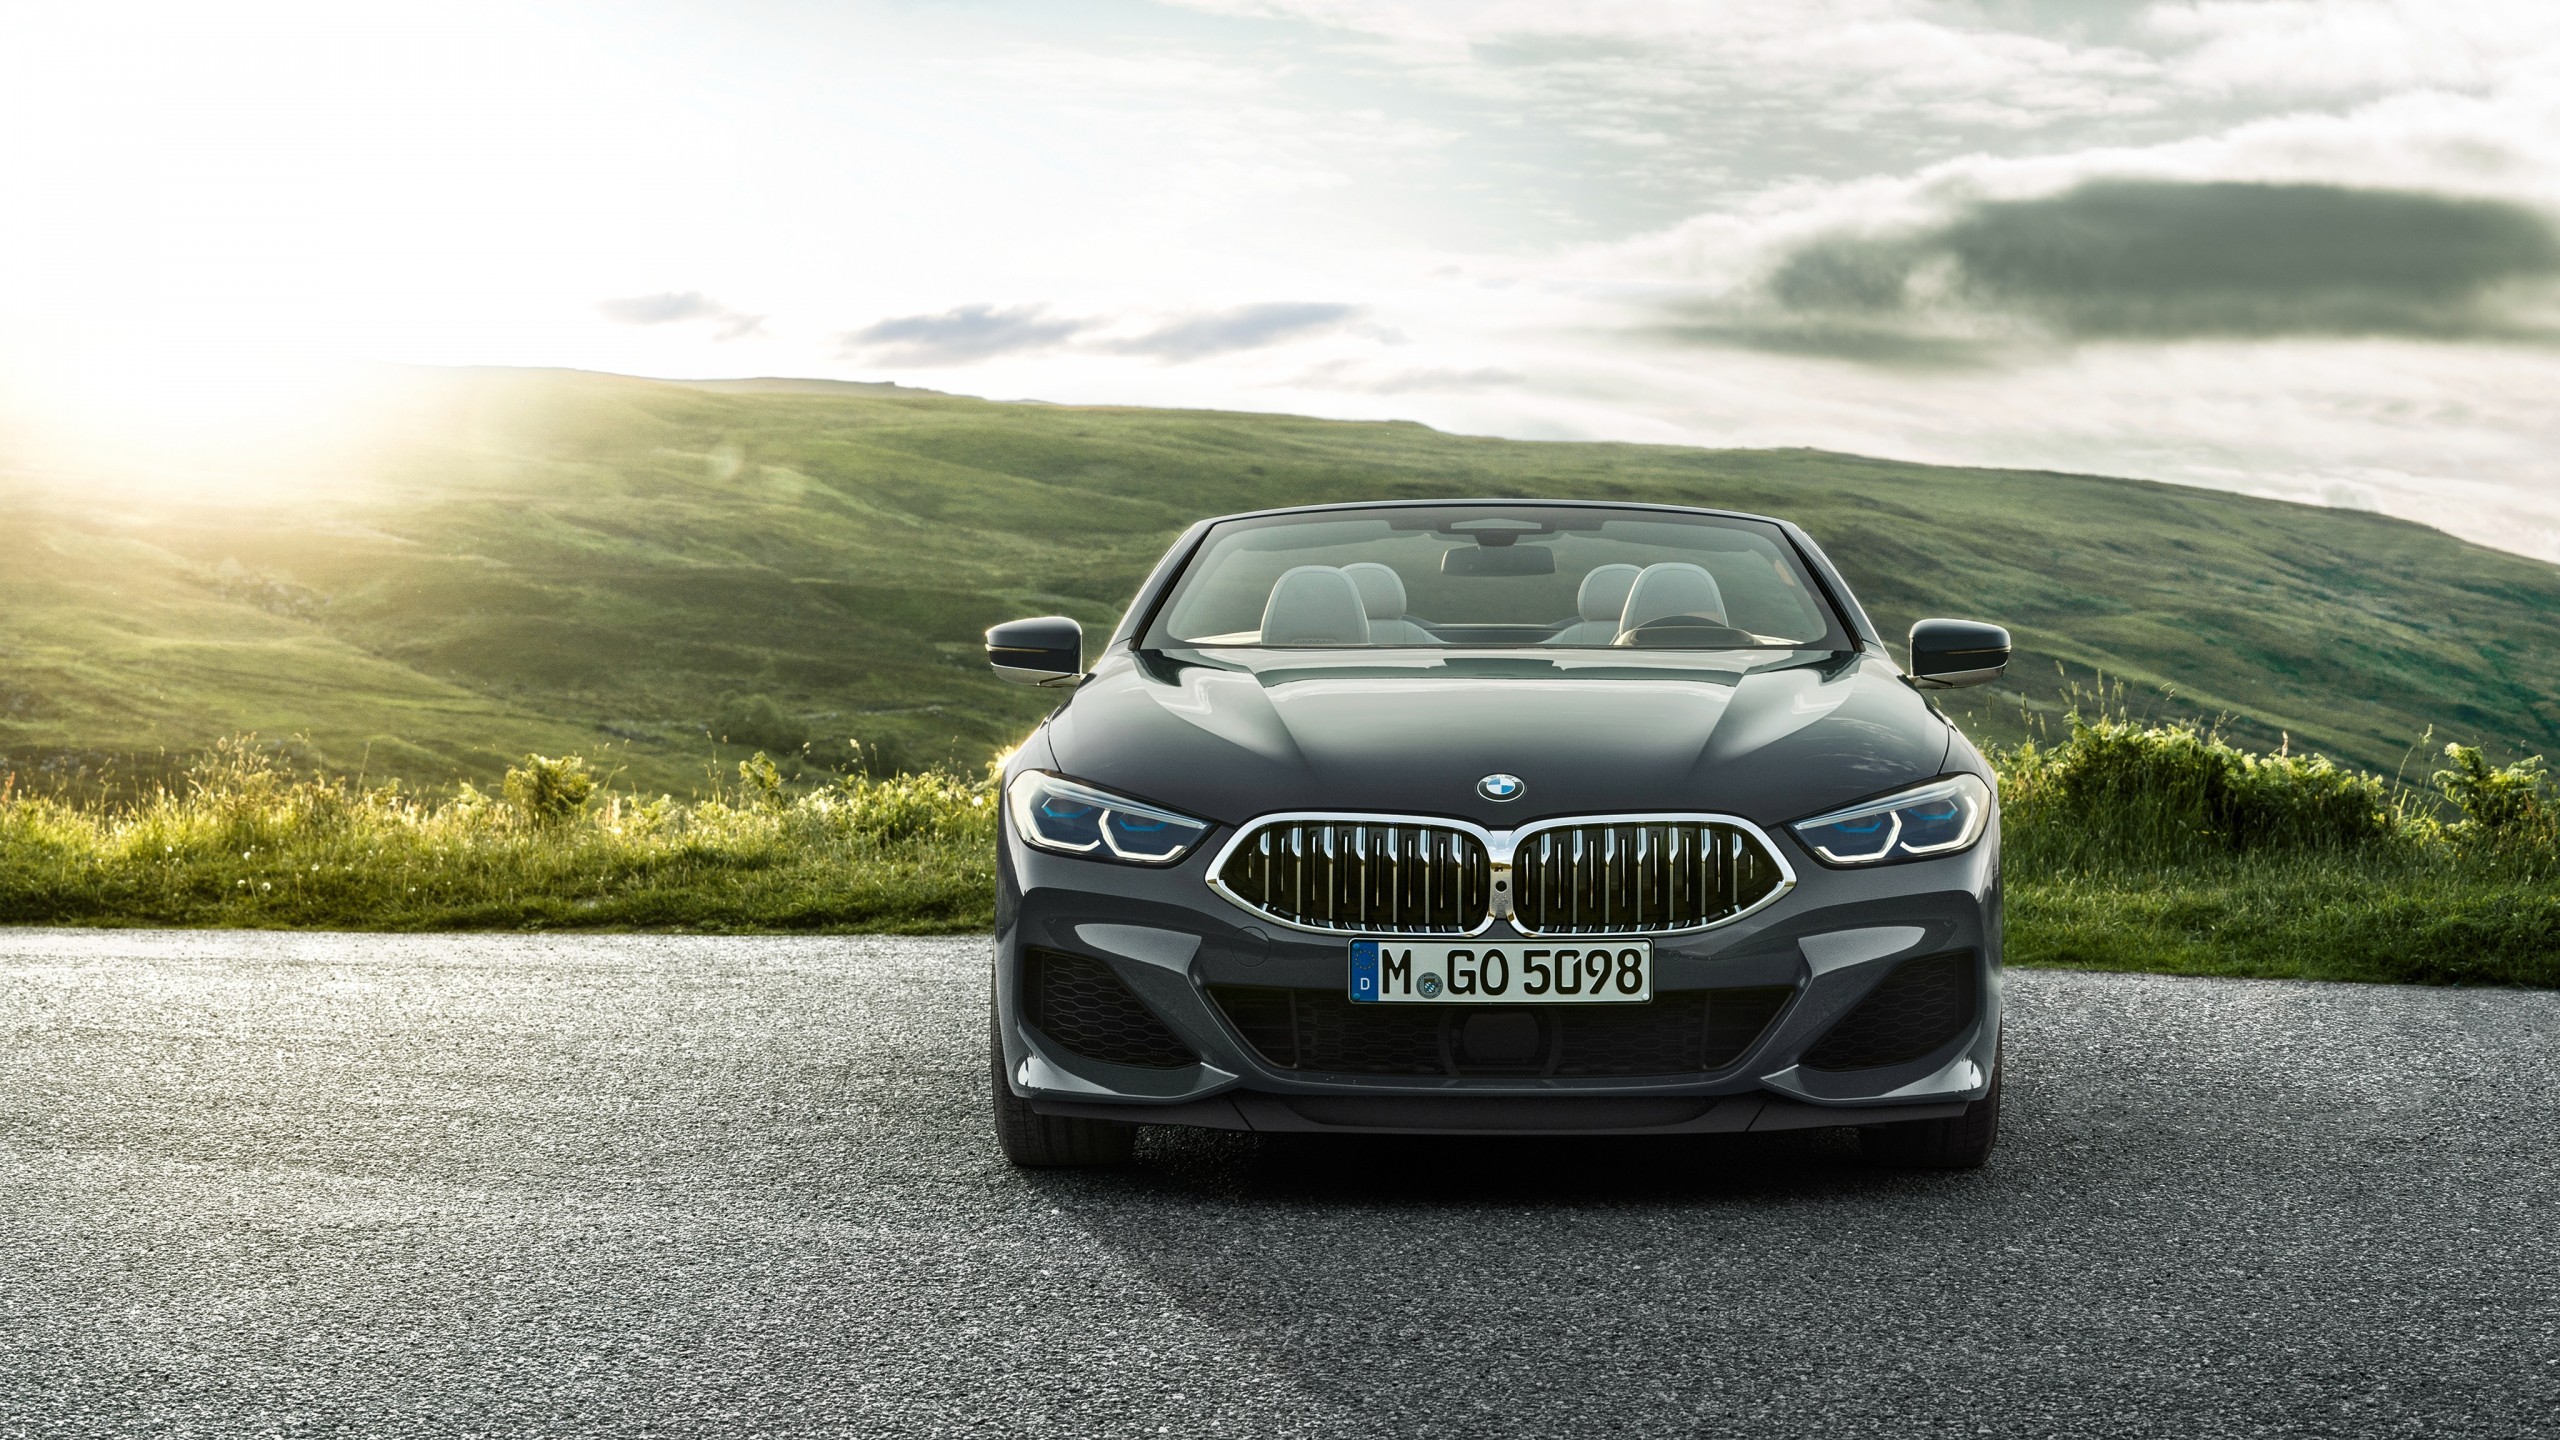 Bmw M850i Xdrive Cabrio, Luxury Cars, Sunlight, Front - Voitures De Luxe Bmw 2019 - HD Wallpaper 